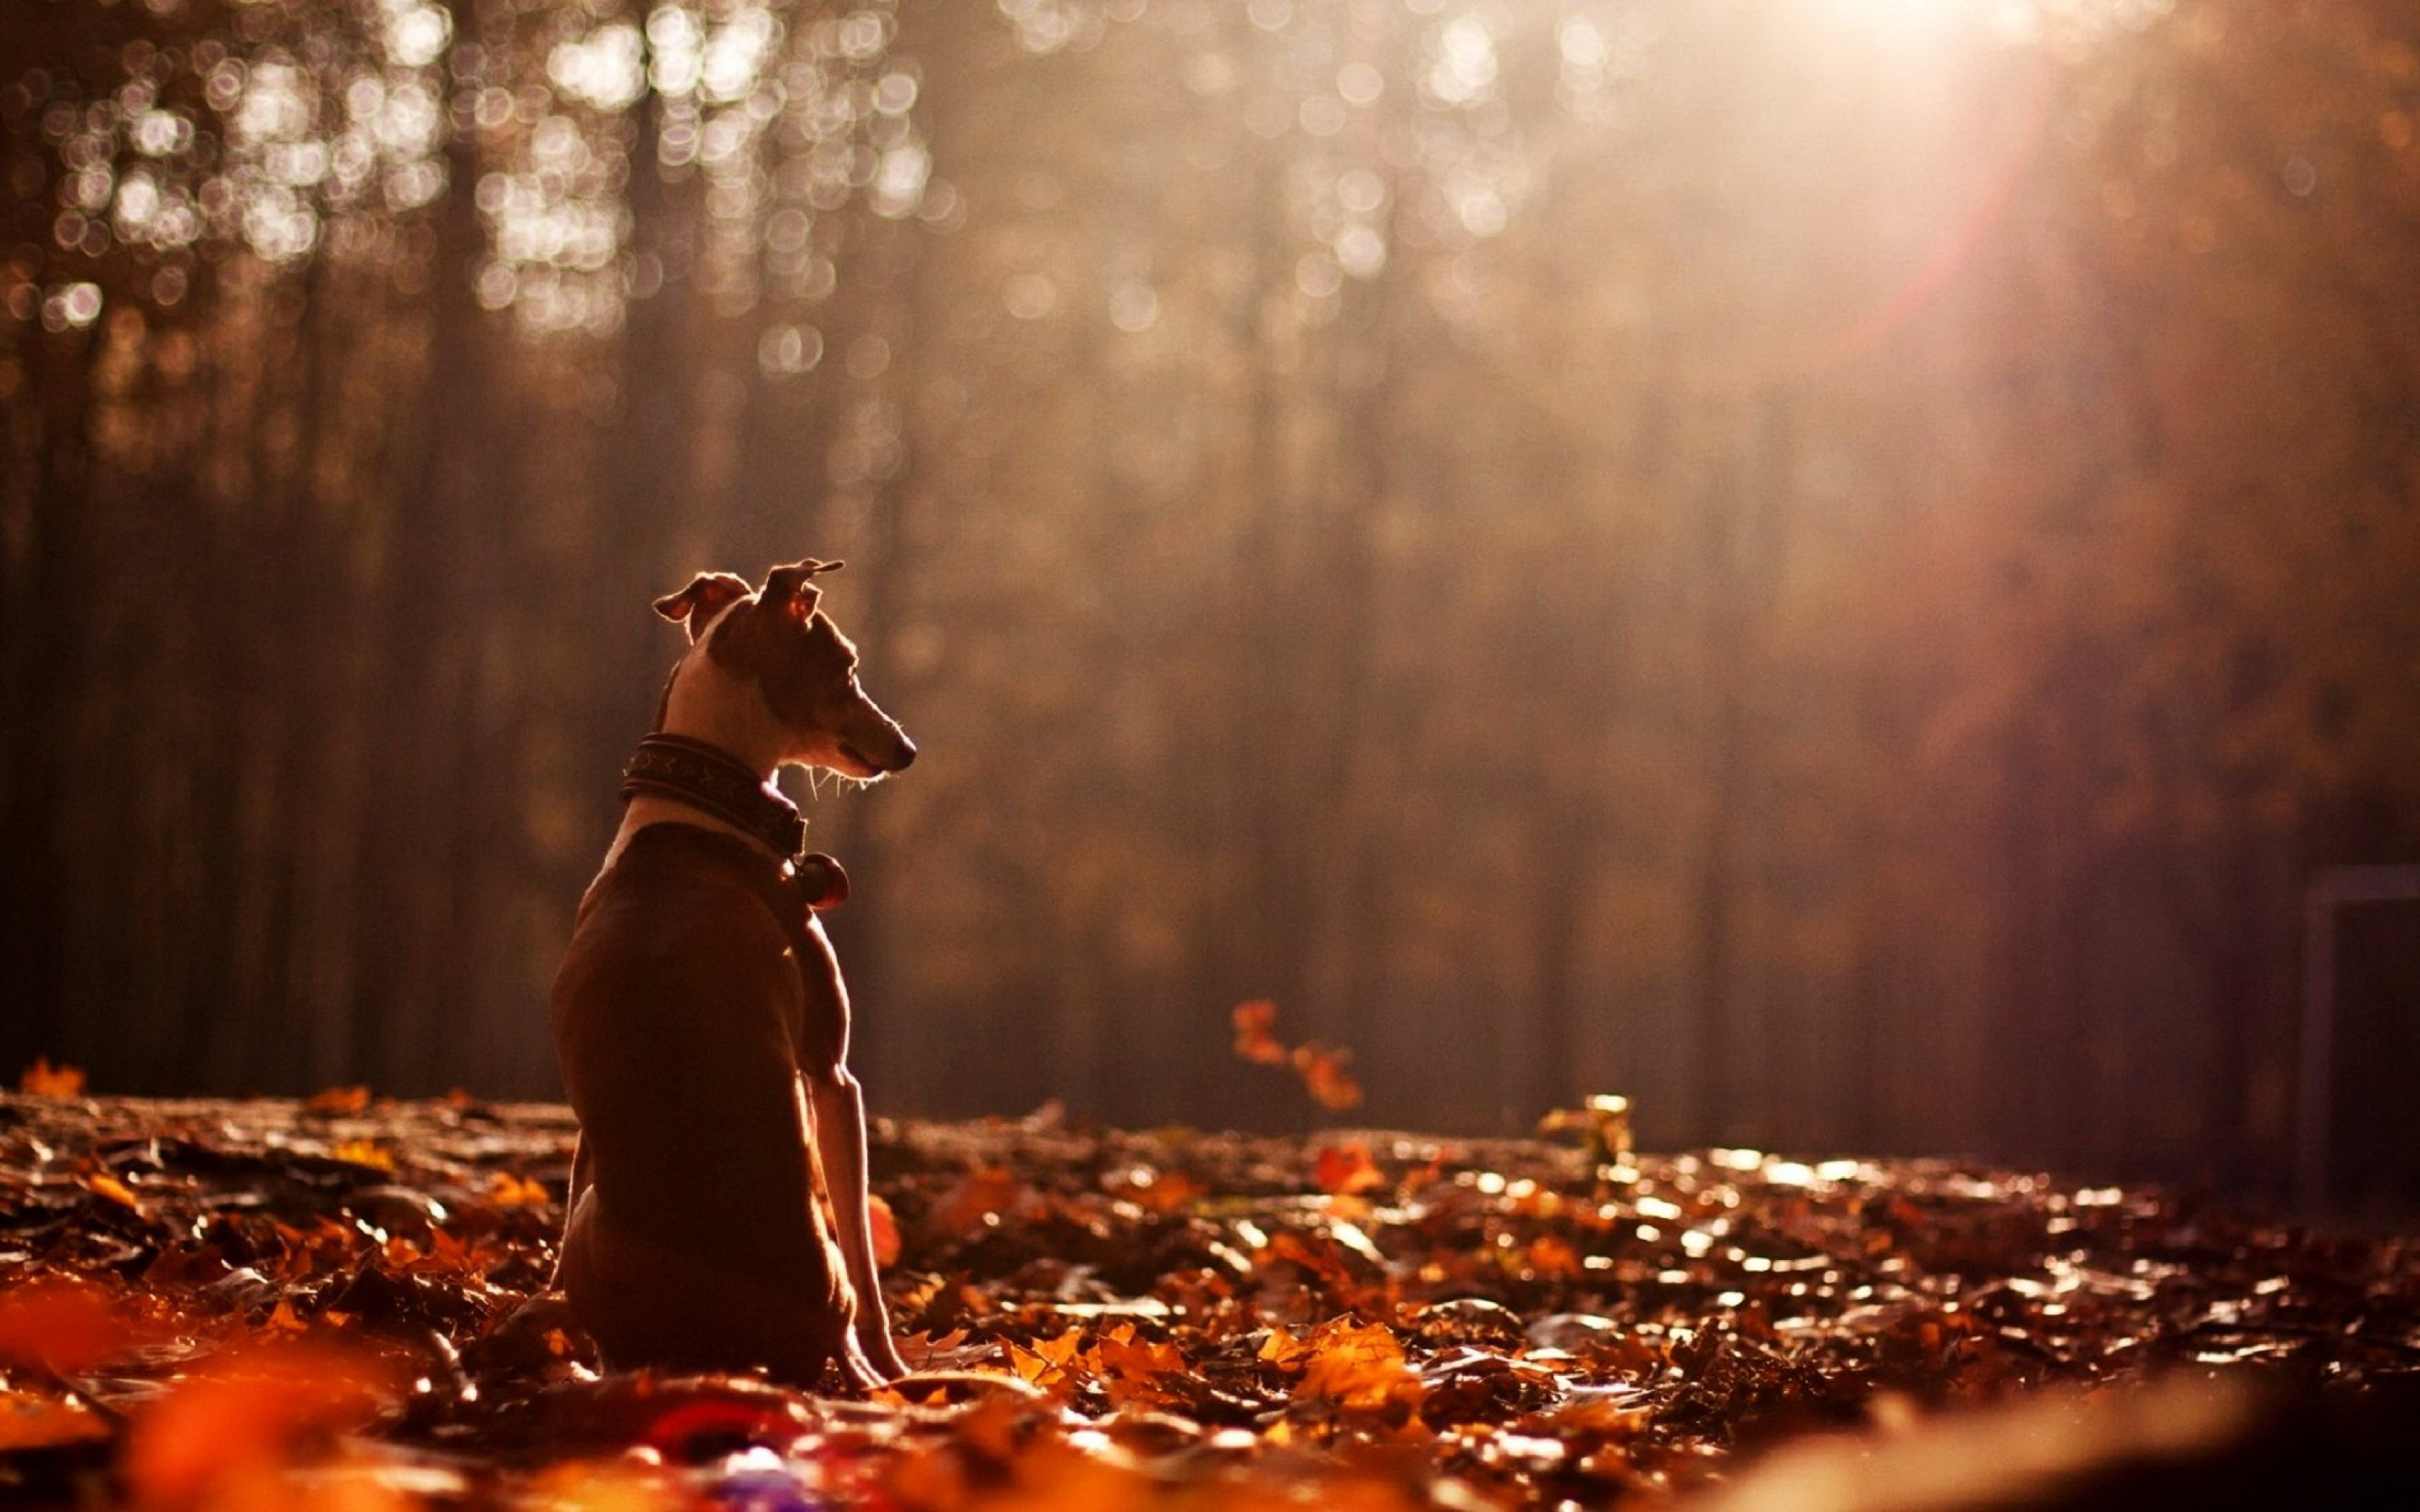 Cute dog animal alone forest autumn wallpaper 3840x2400 680566